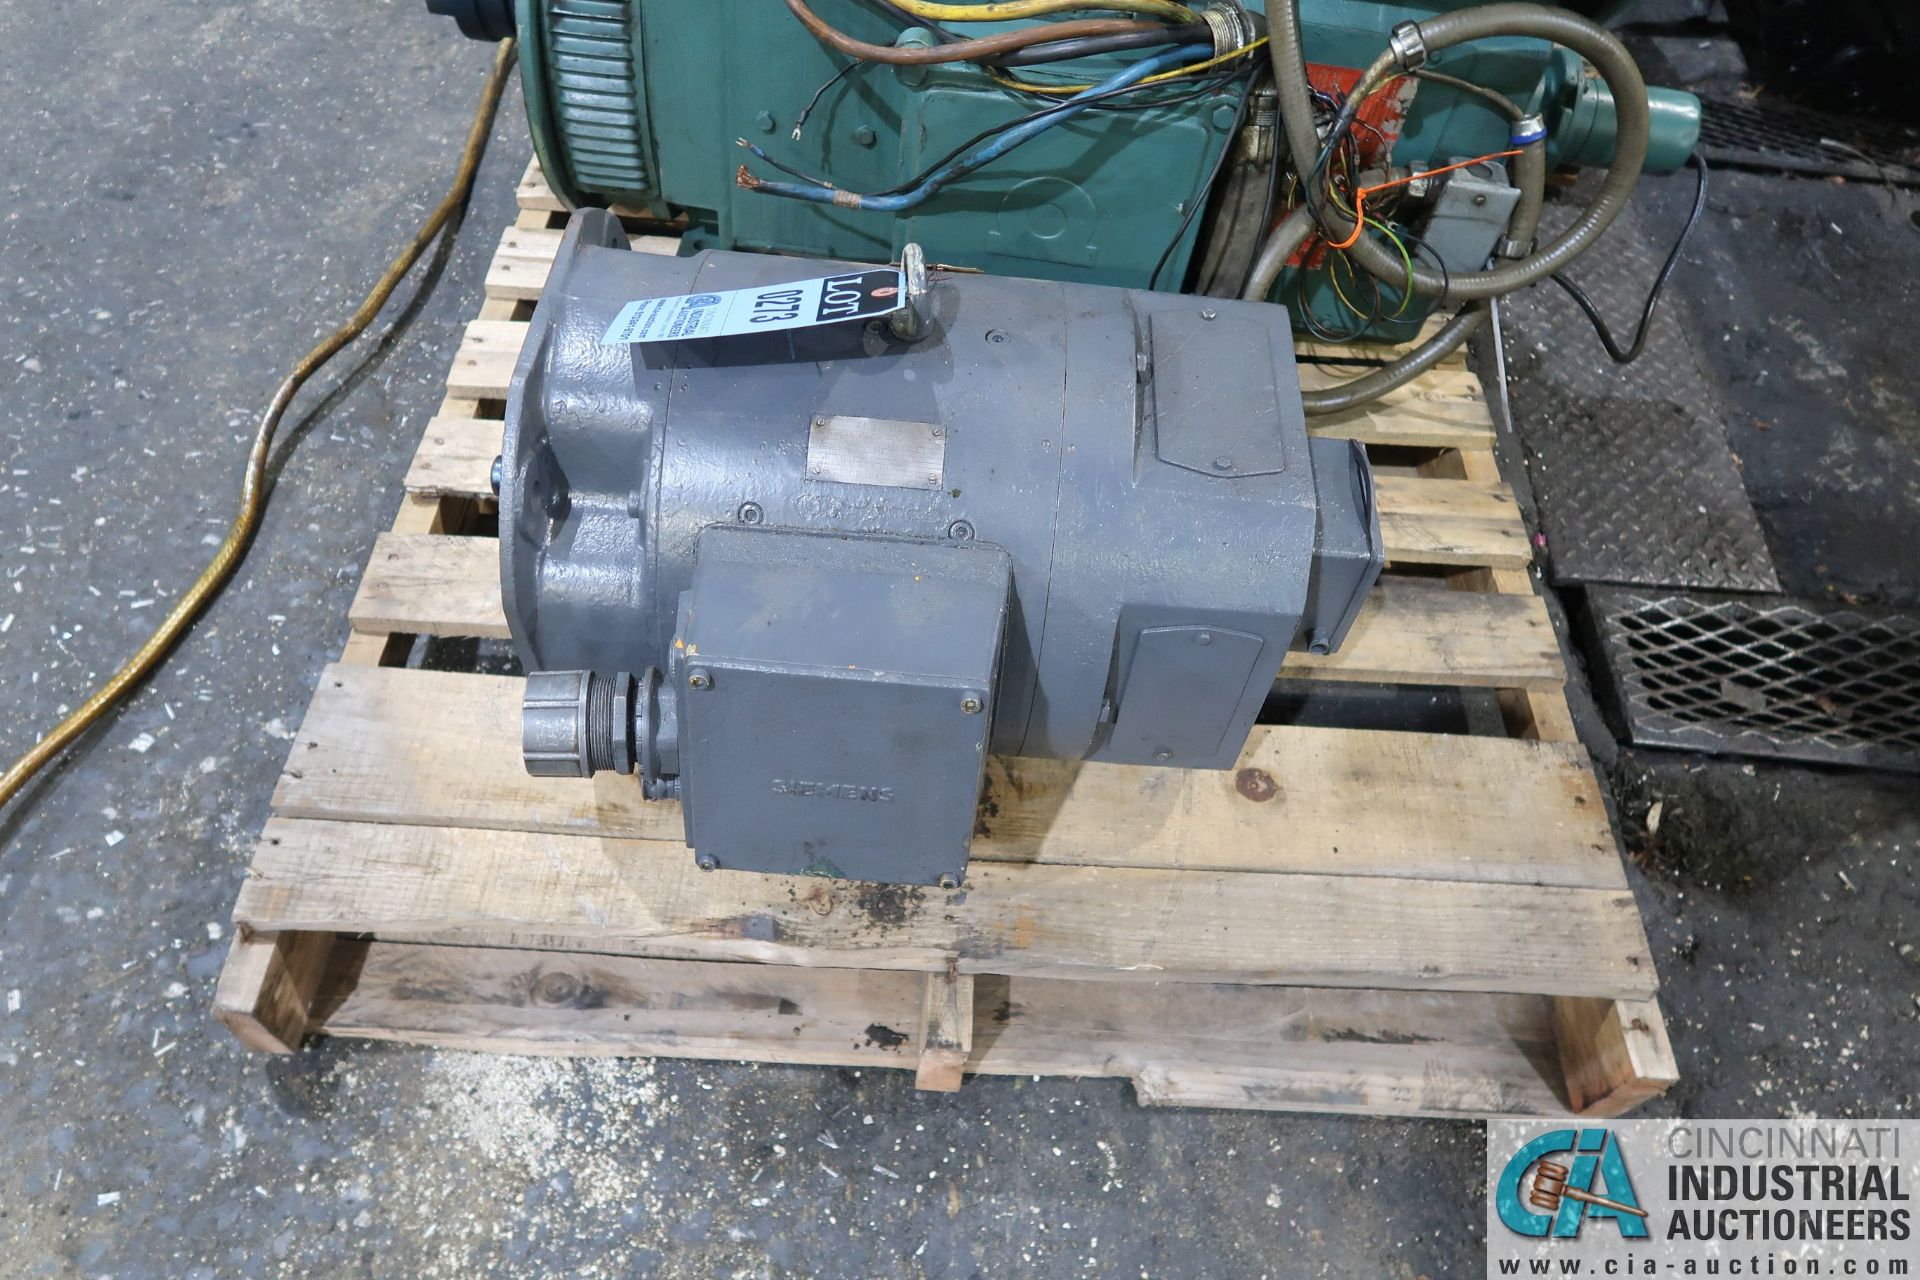 32 KW ELECTRIC MOTOR